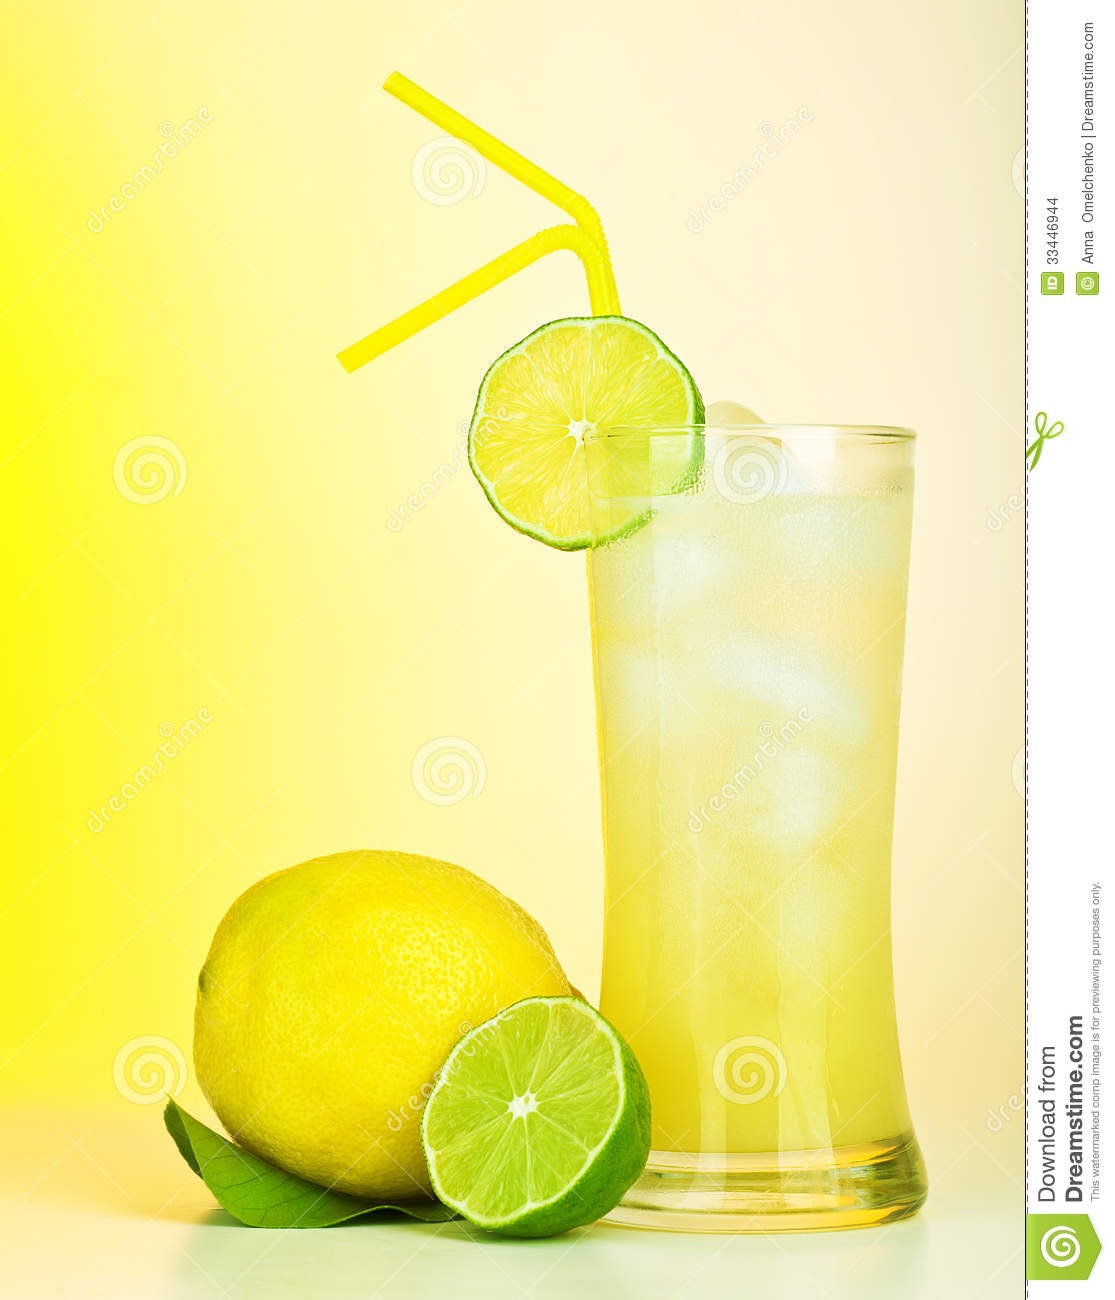 Fresh Lemon Juice Tasty Cold Lime Drink Healthy Fruits And Icy    